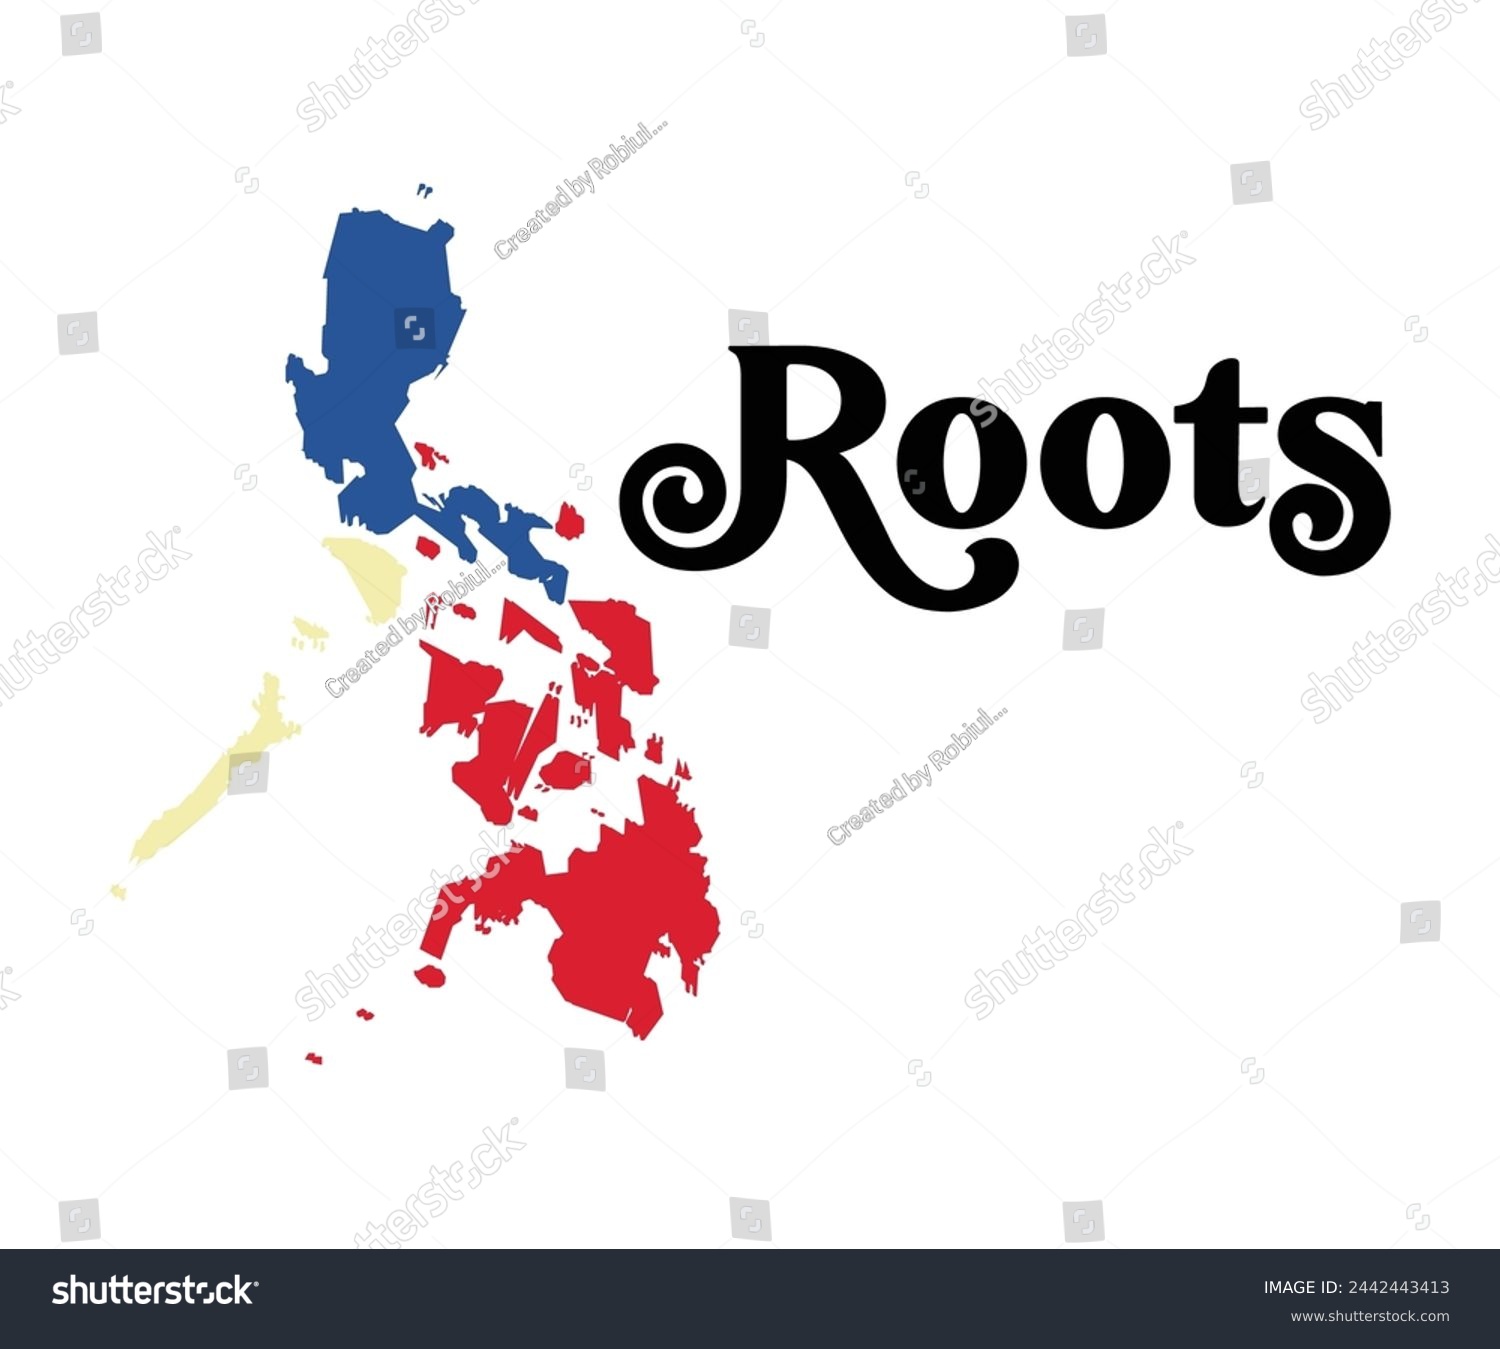 SVG of Philippines T-shirt Svg,Philippines Lover Shirt,Philippines Shirt, Philippines T Shirt, Filipino Roots,Cut File,Inastant Download svg